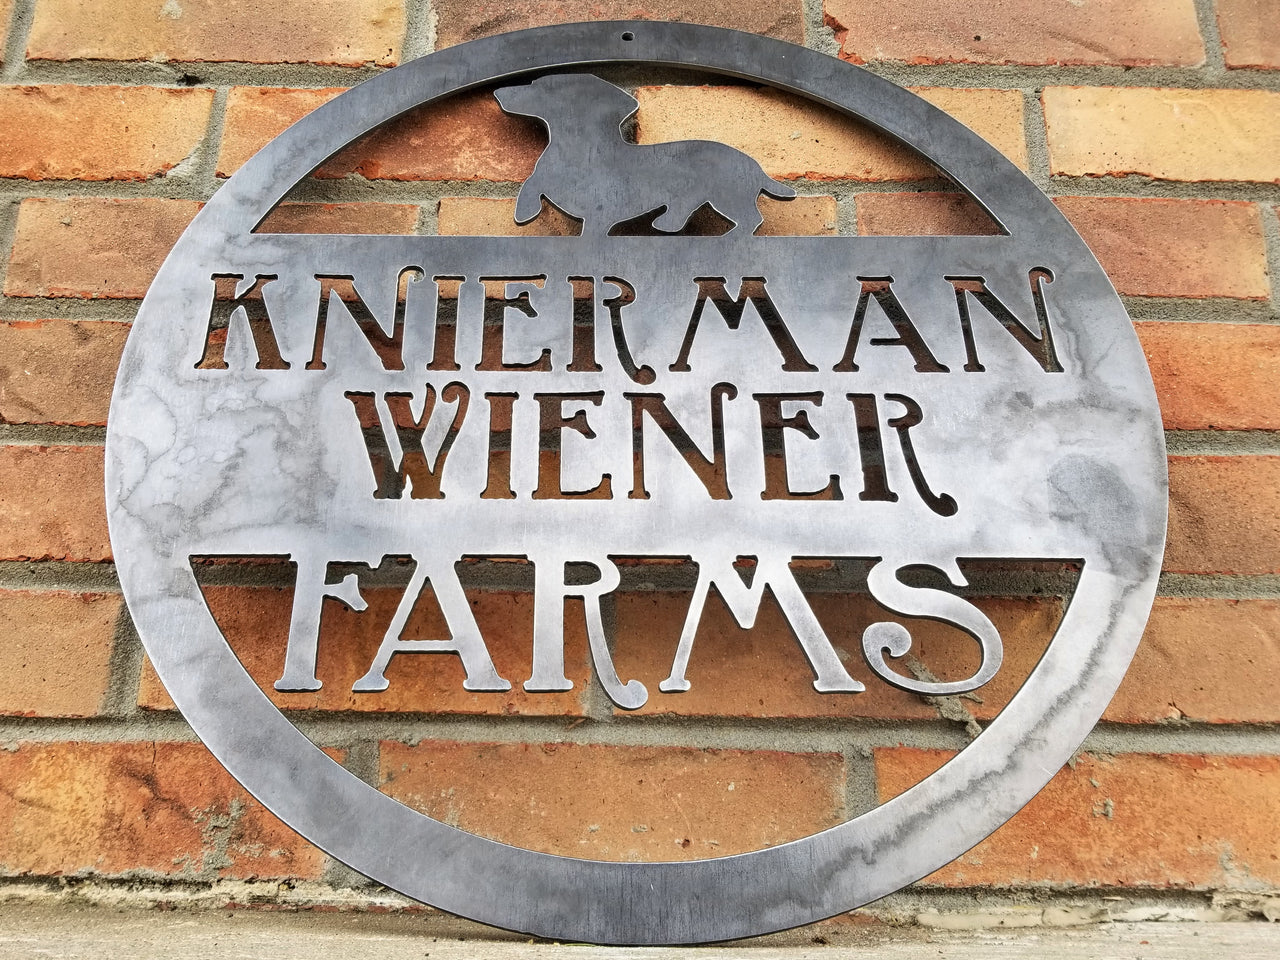 This is a custom round metal sign that features a wiener dog and reads from the top down, "Knierman Wiener Farms"